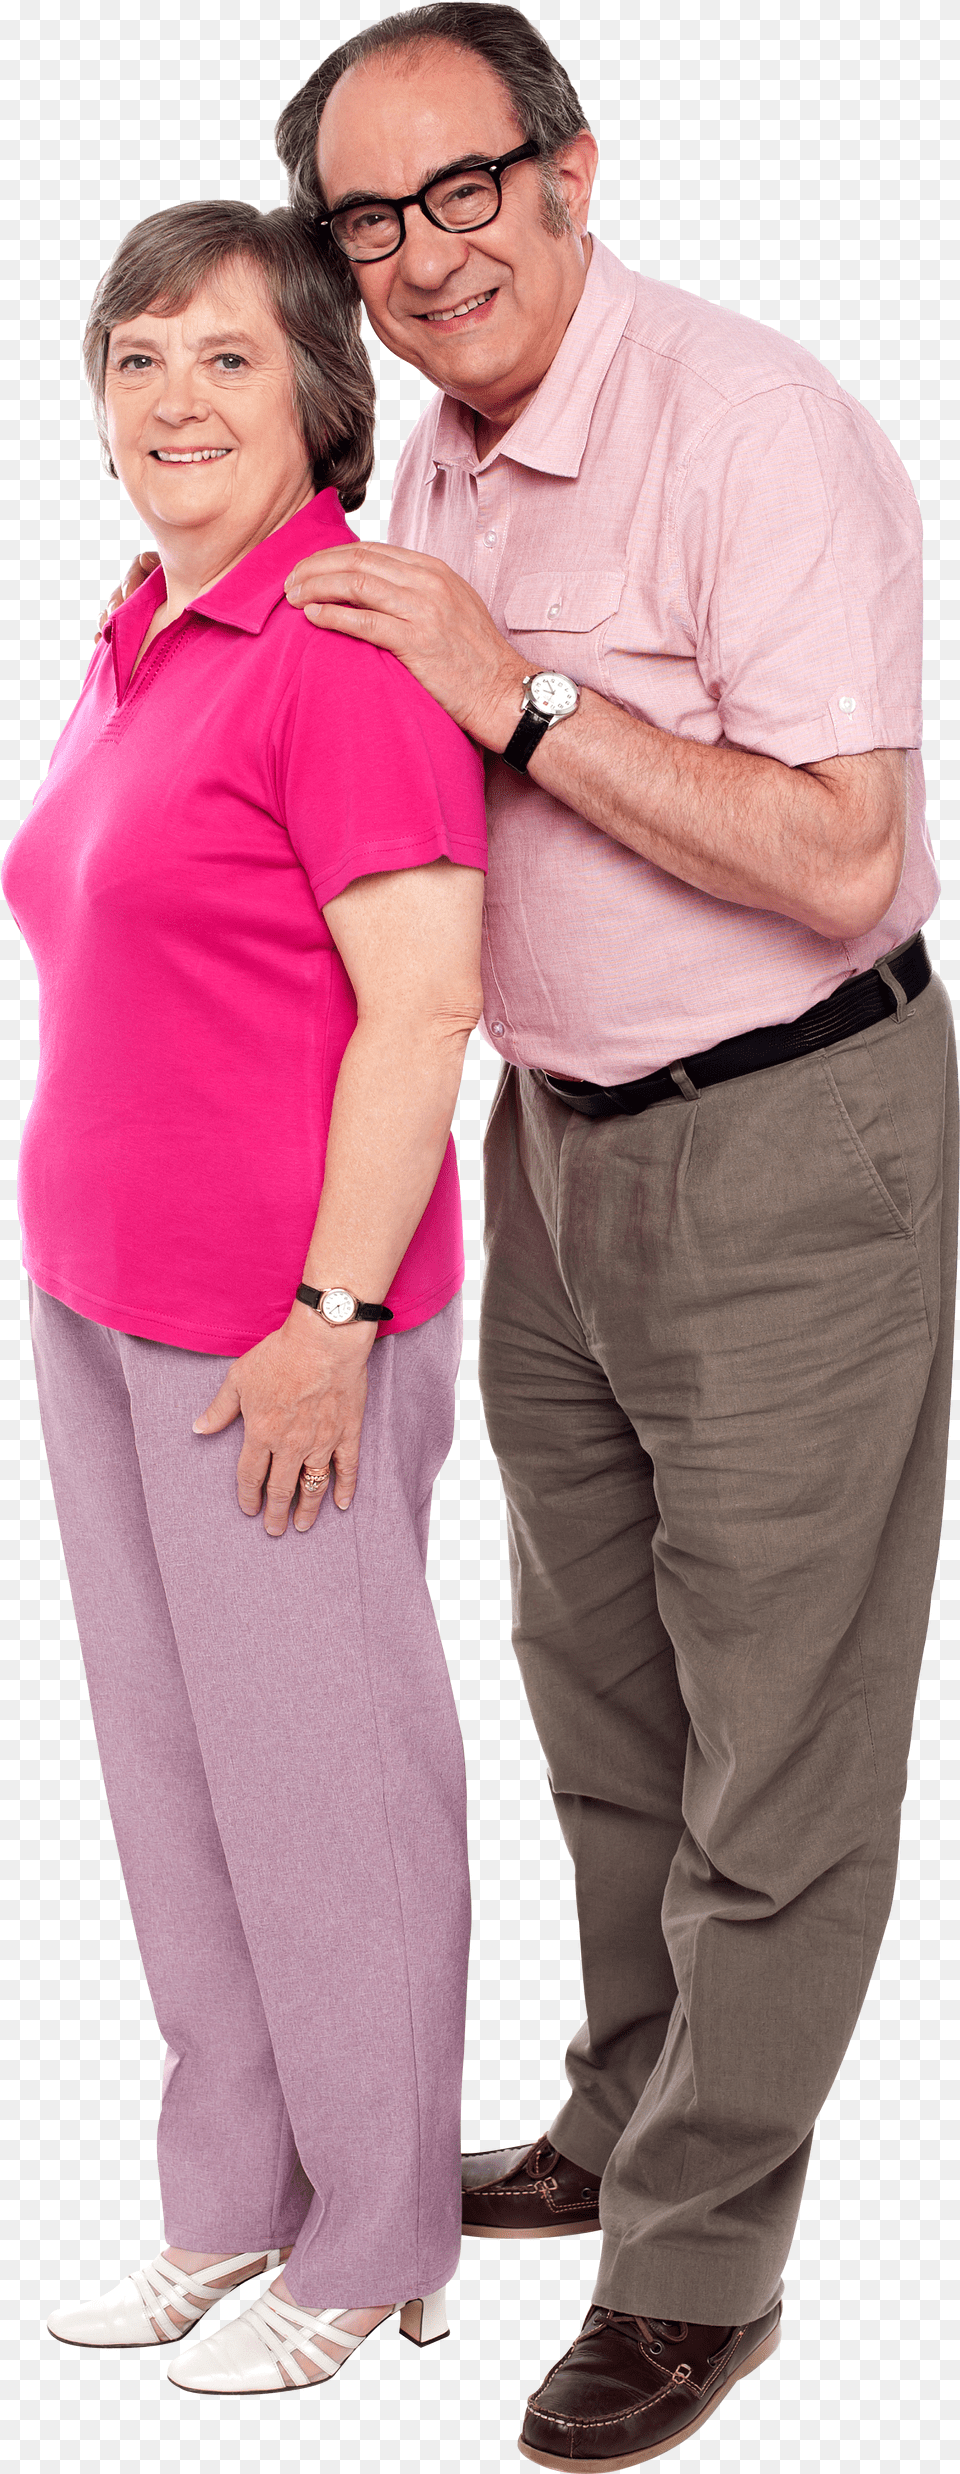 Senior Citizens Commercial Use Image Old Married Couple Png